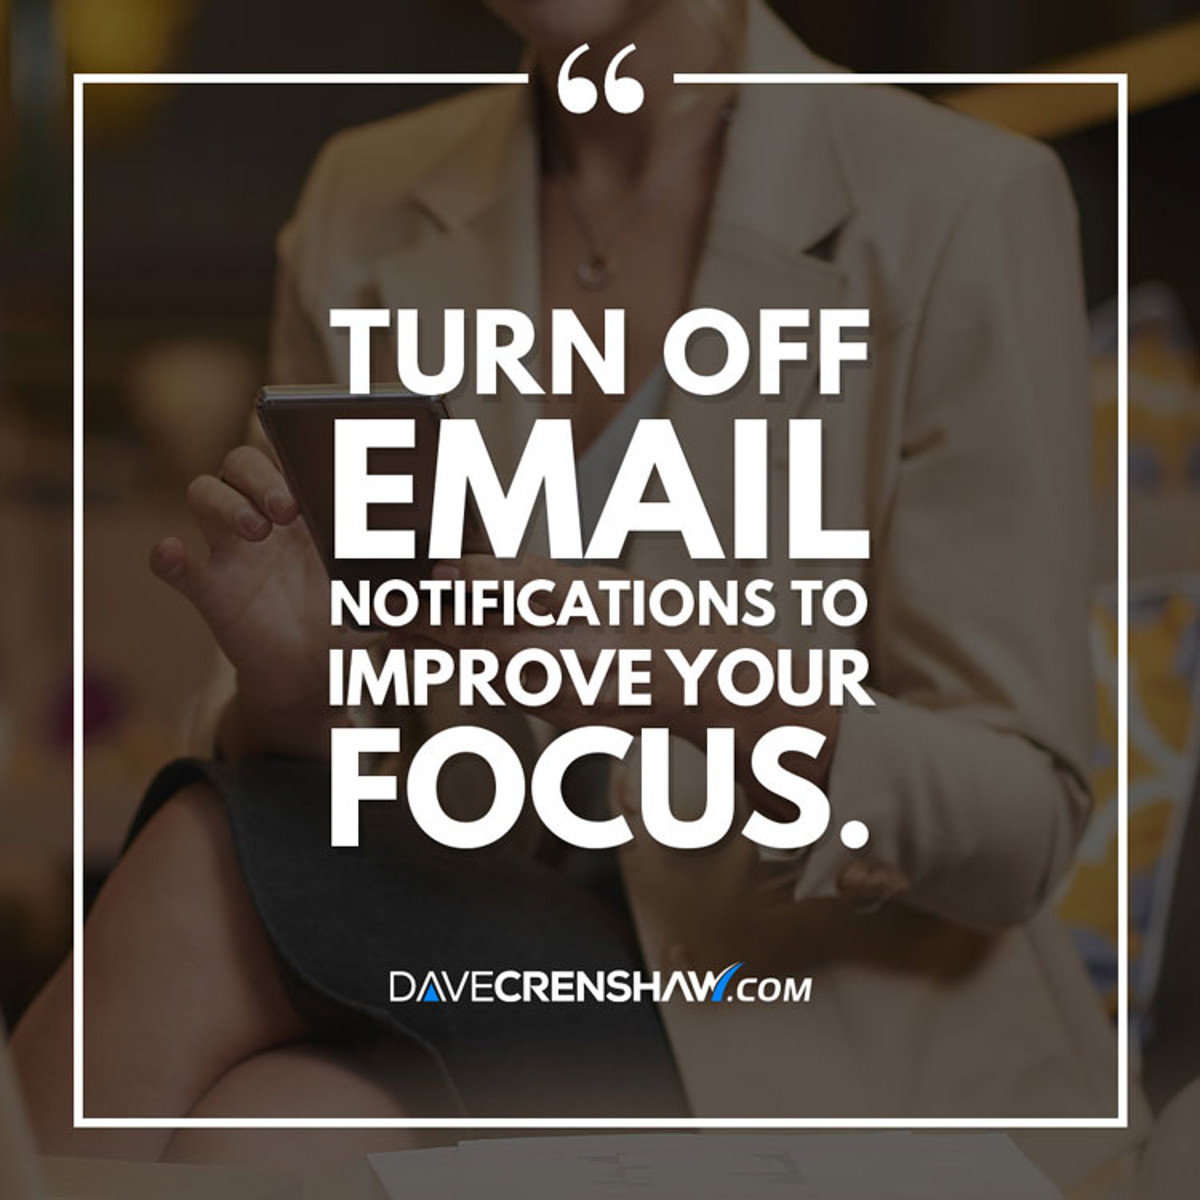 Turn off email notifications to improve your focus